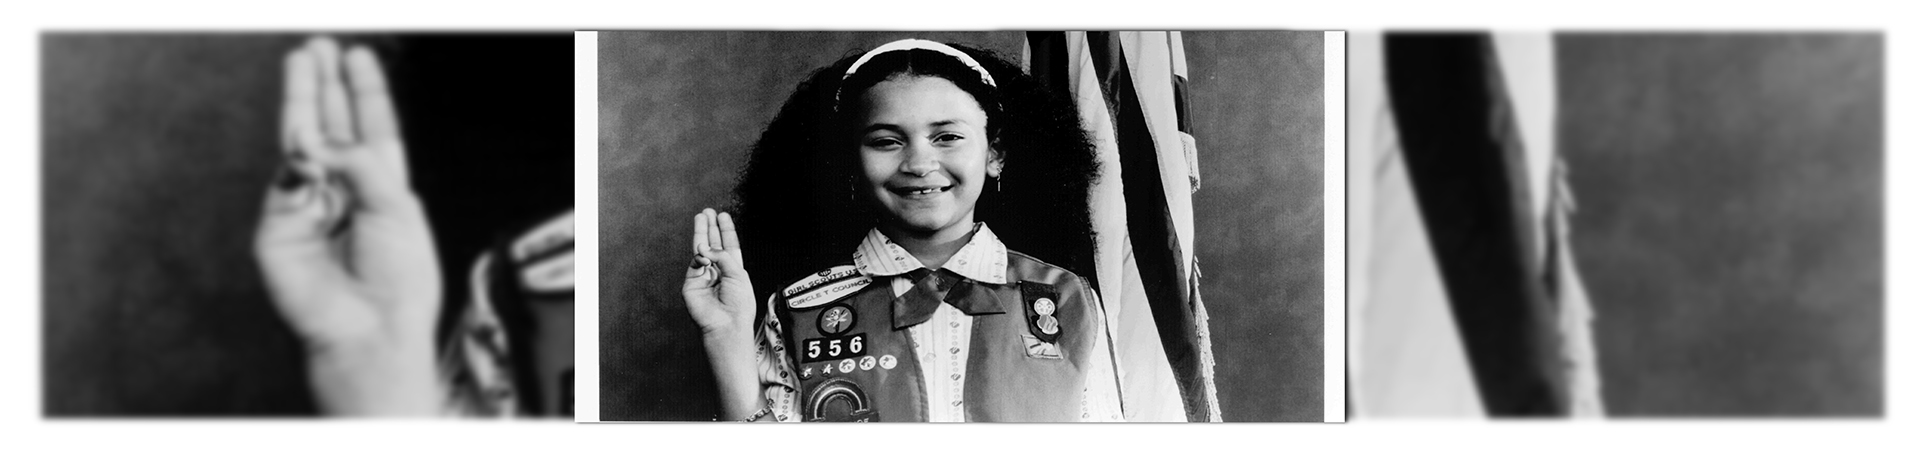  historic photo of girl scout with pledge 